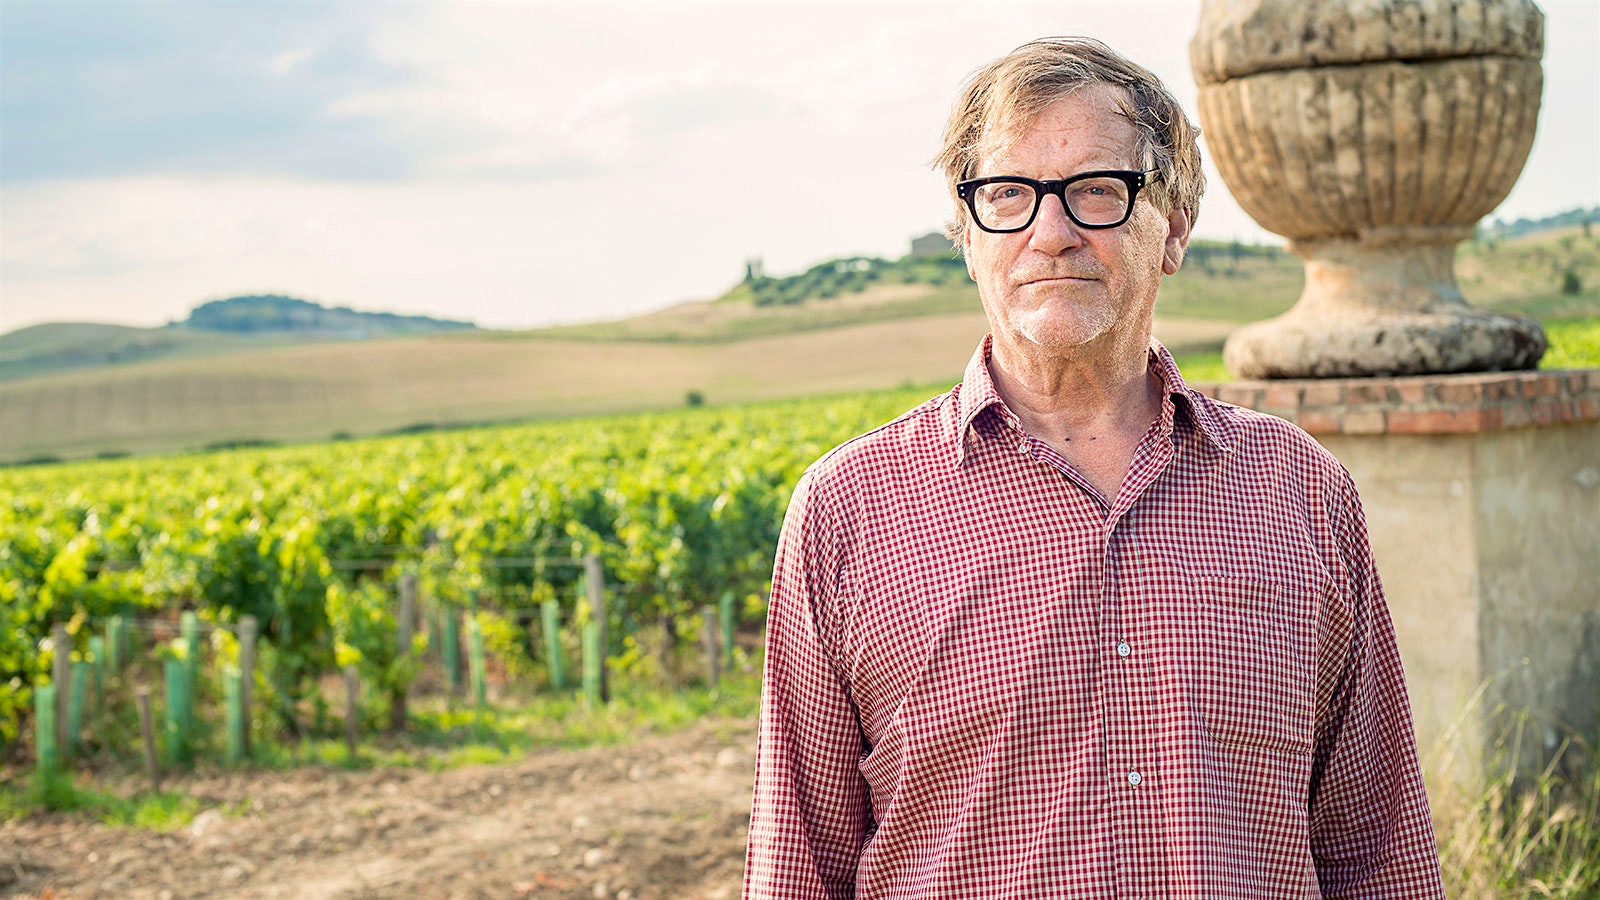  Andrea Franchetti bought his Tenuta Trinoro farm as a retreat with the money he made selling a painting. The idea of planting vines came later.